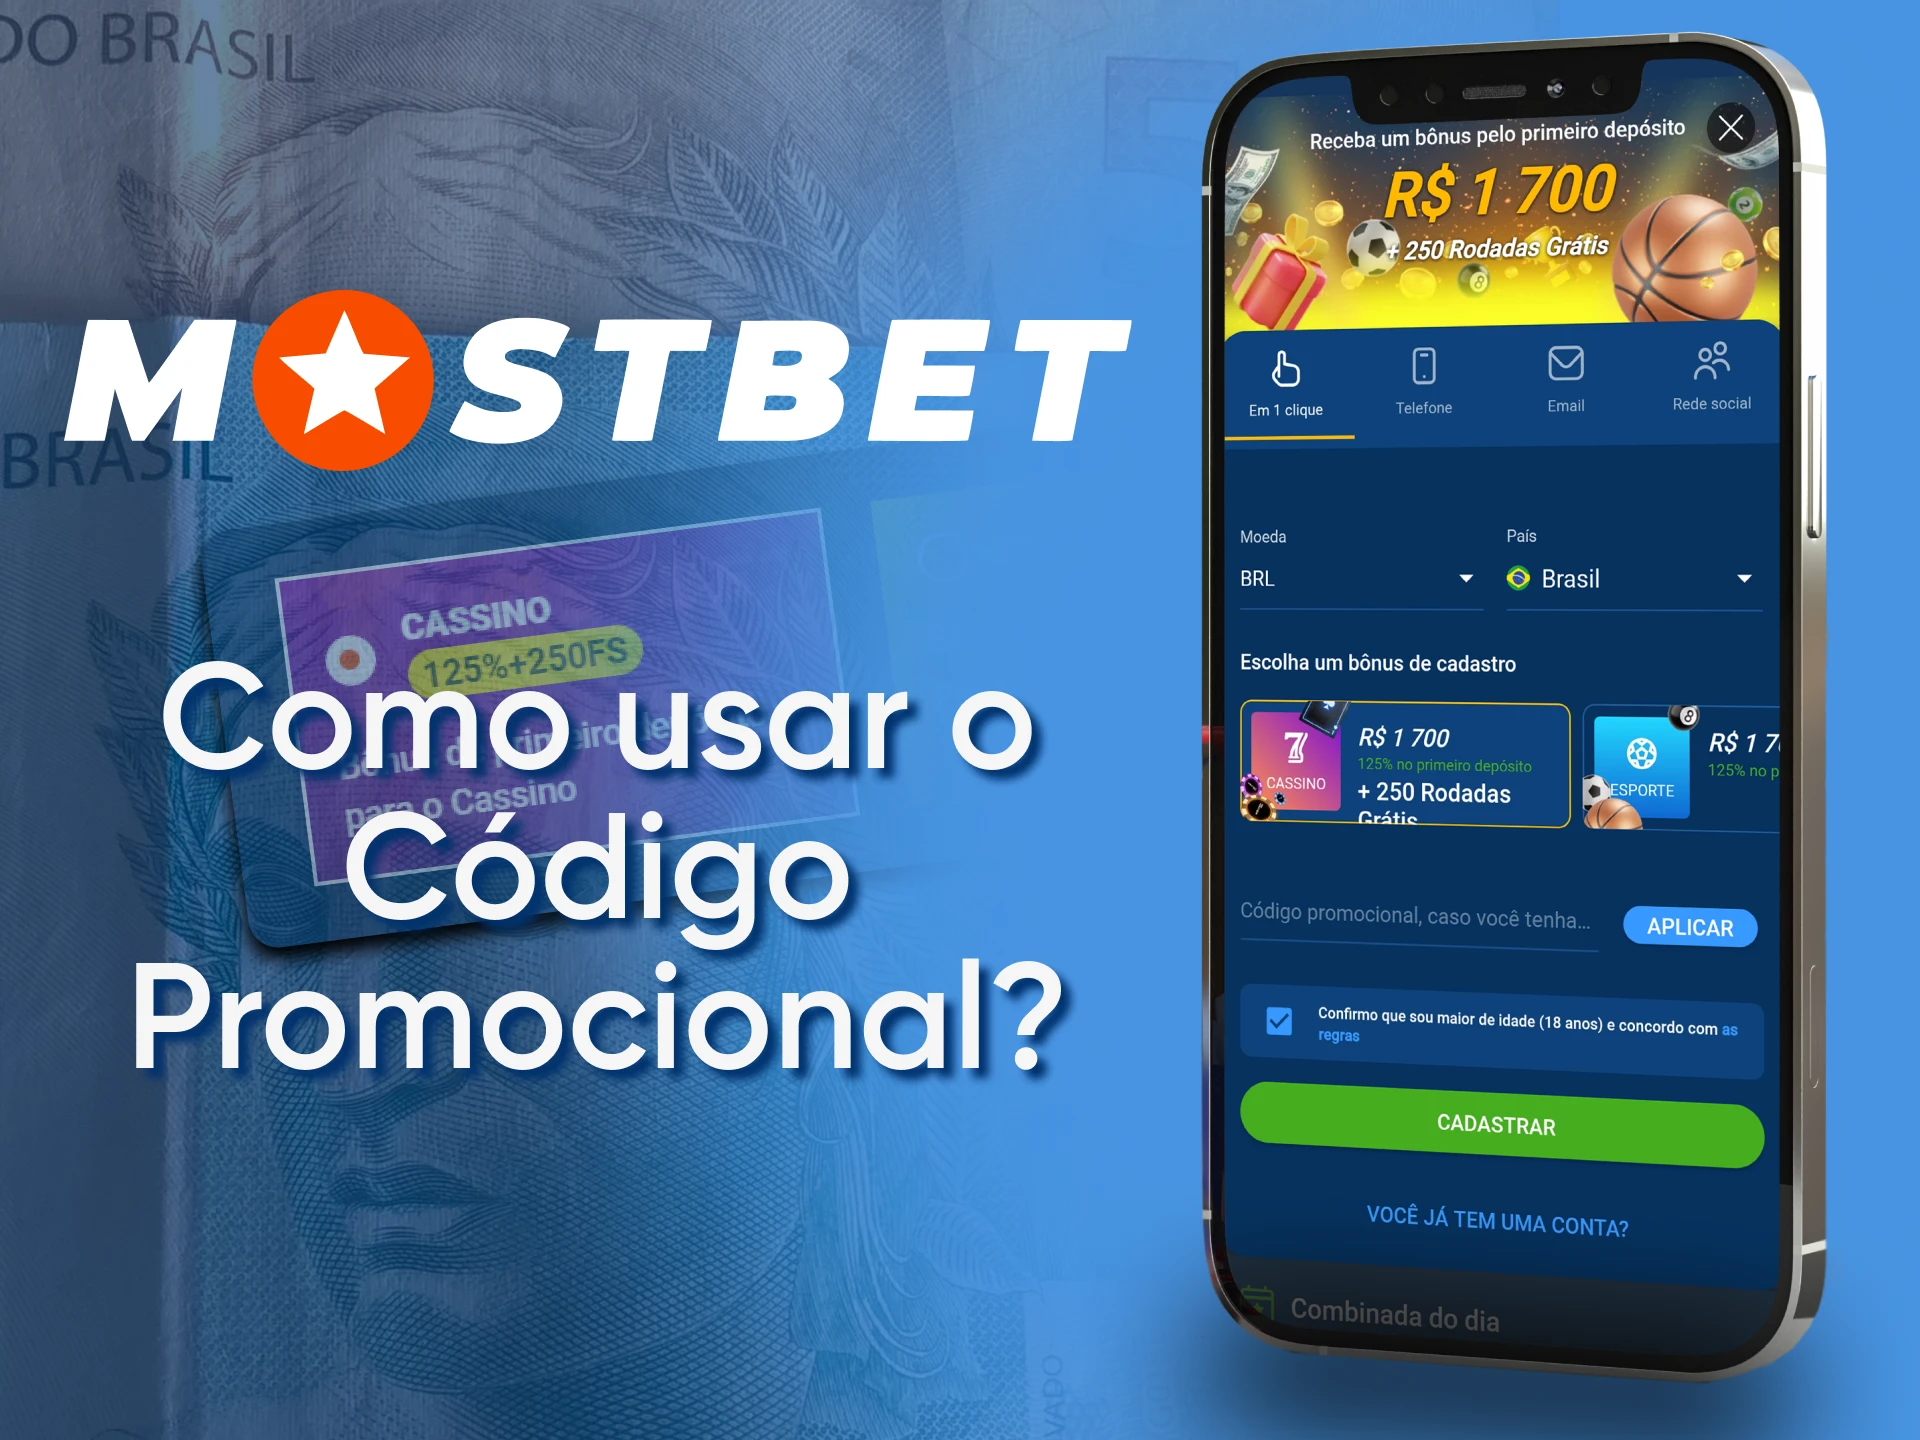 Instructions on how to use a Mostbet promo code in Brazil.